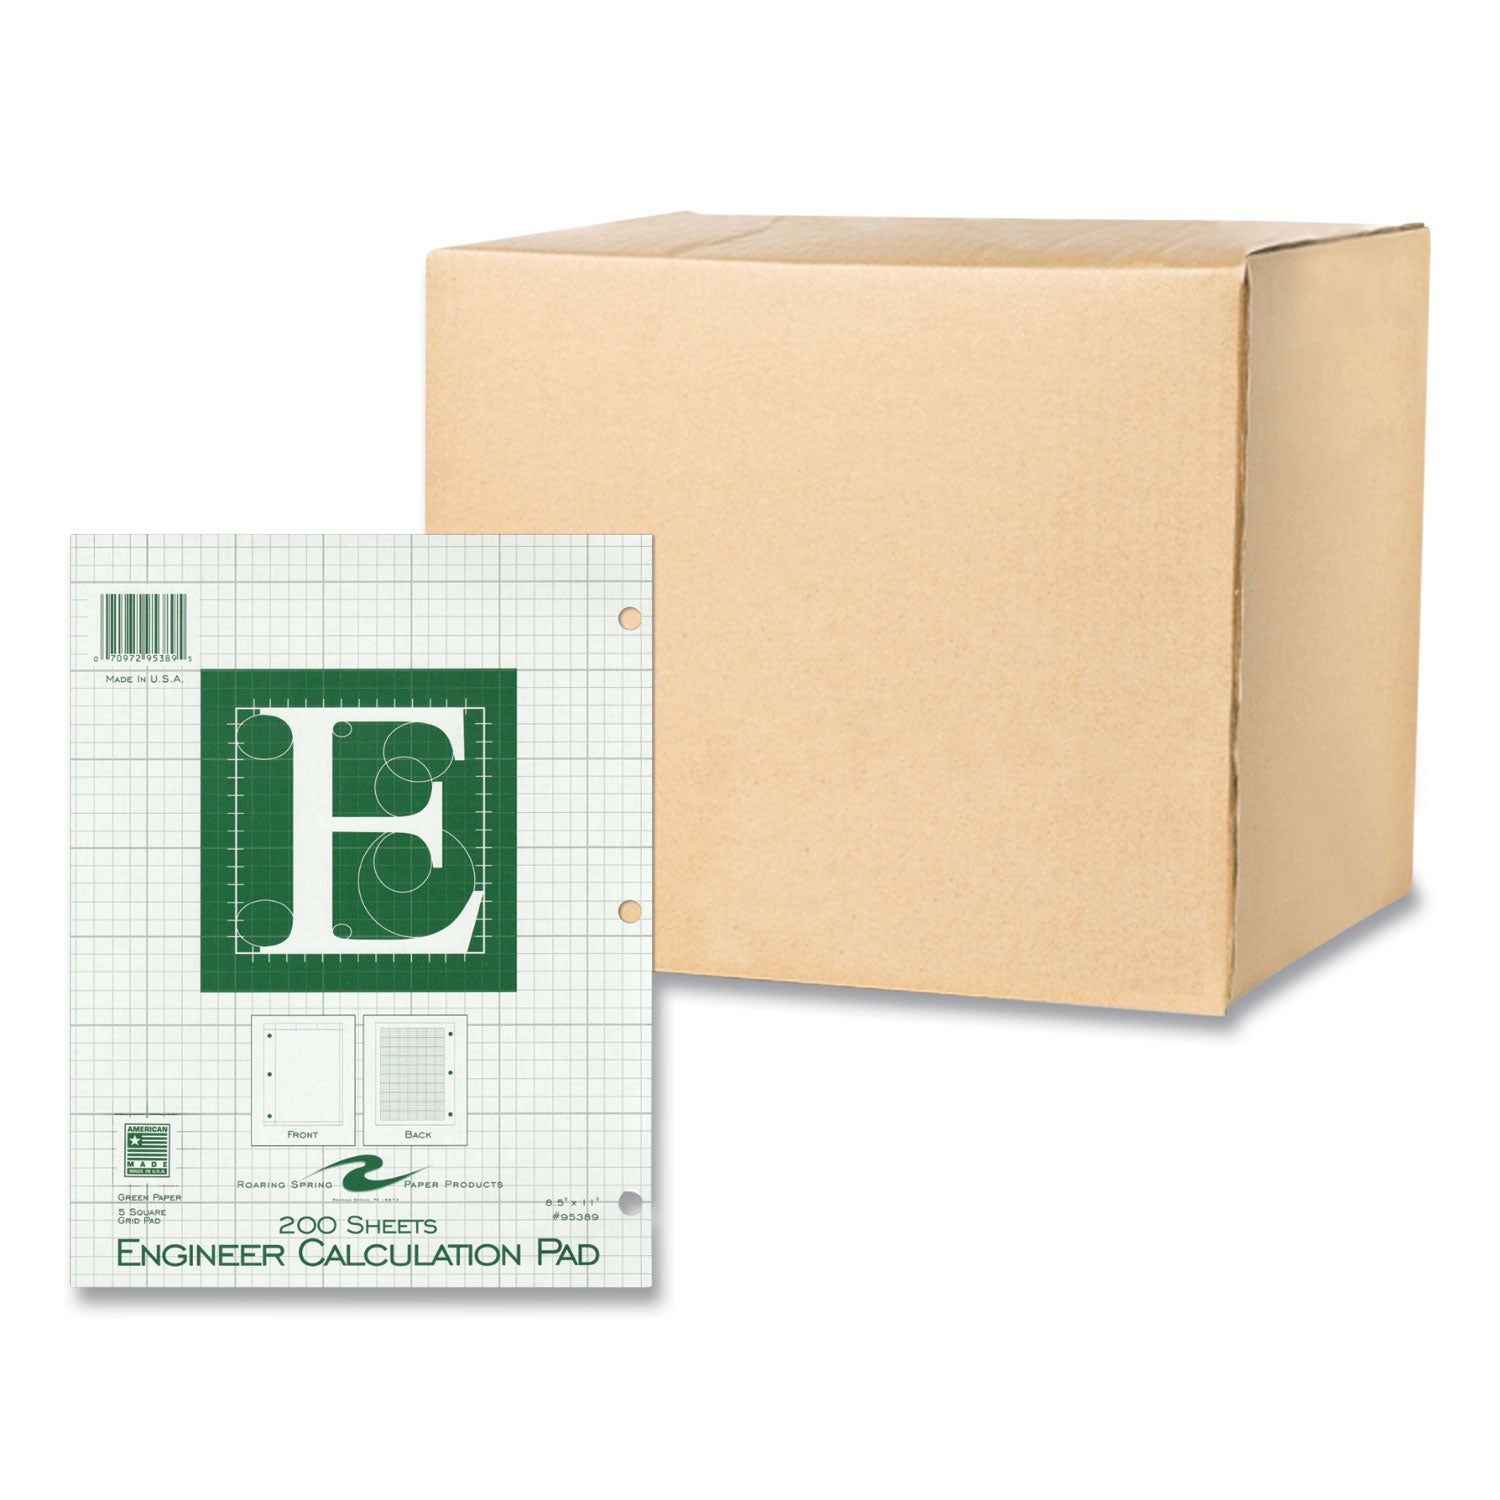 engineer-pad-05-margins-quad-rule-5-sq-in-1-sq-in-200-lt-green-85x11-sheets-pad-12-ct-ships-in-4-6-business-days_roa95389cs - 2